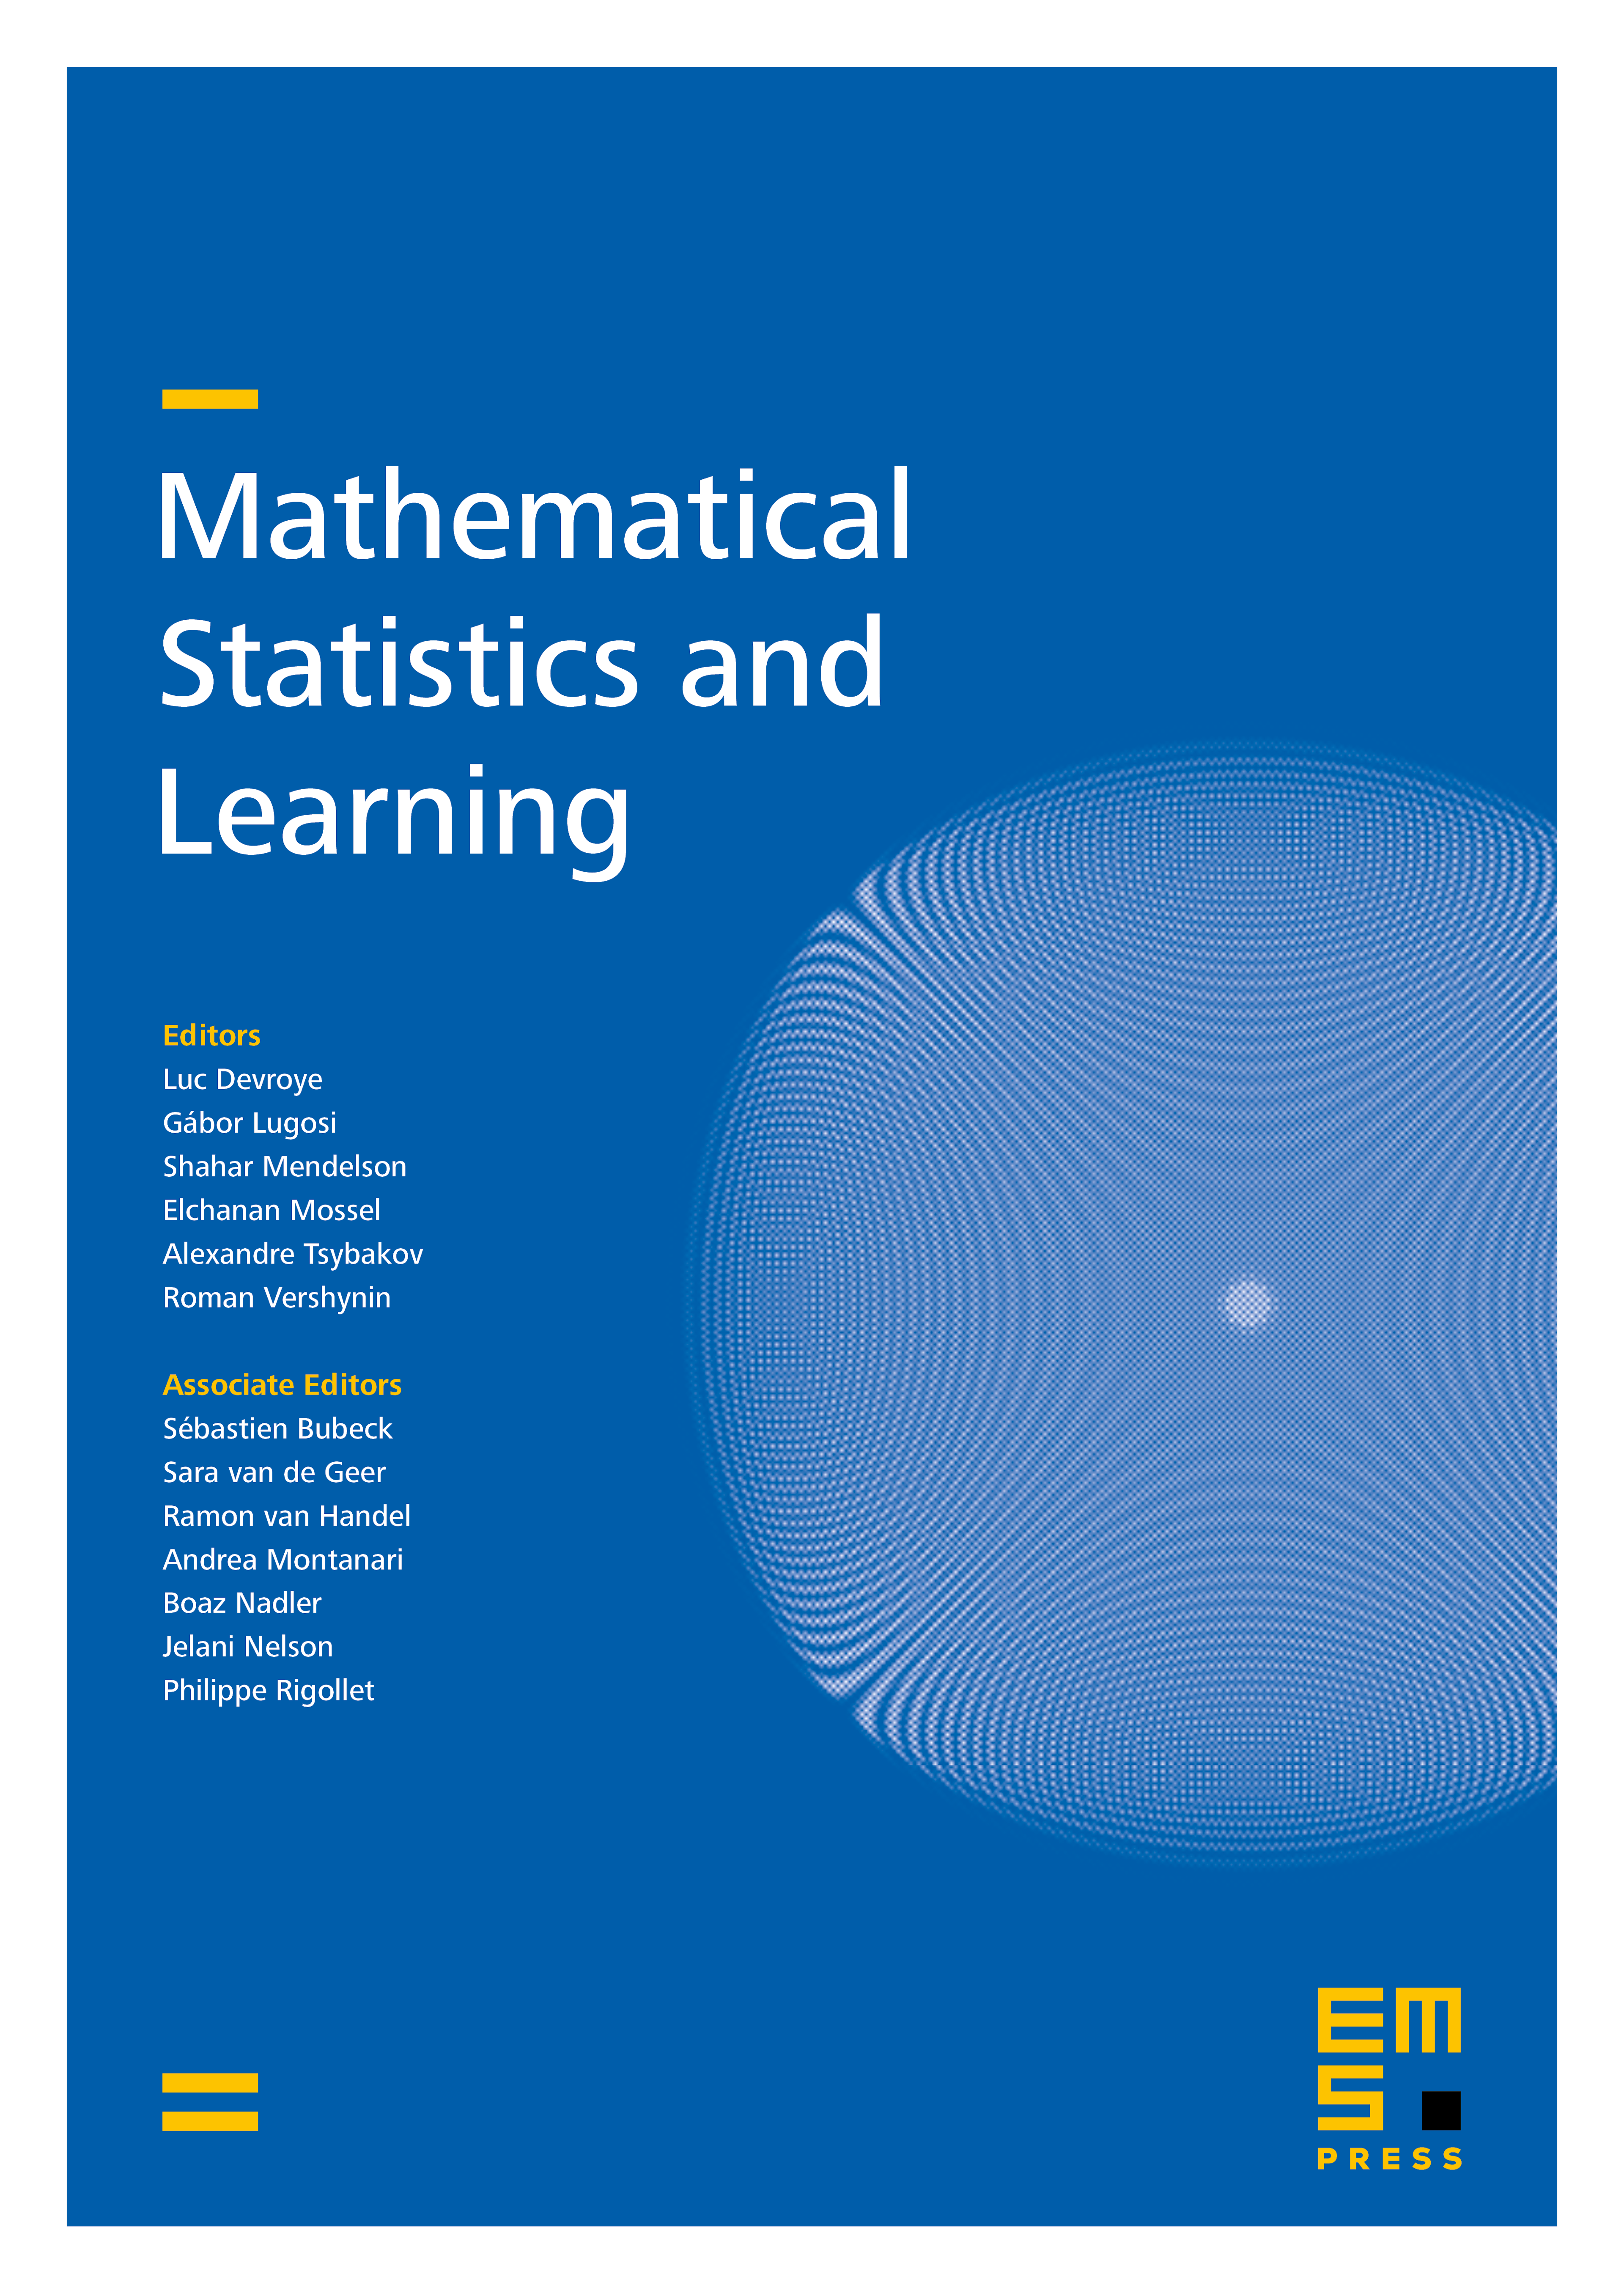 Math. Stat. Learn. cover